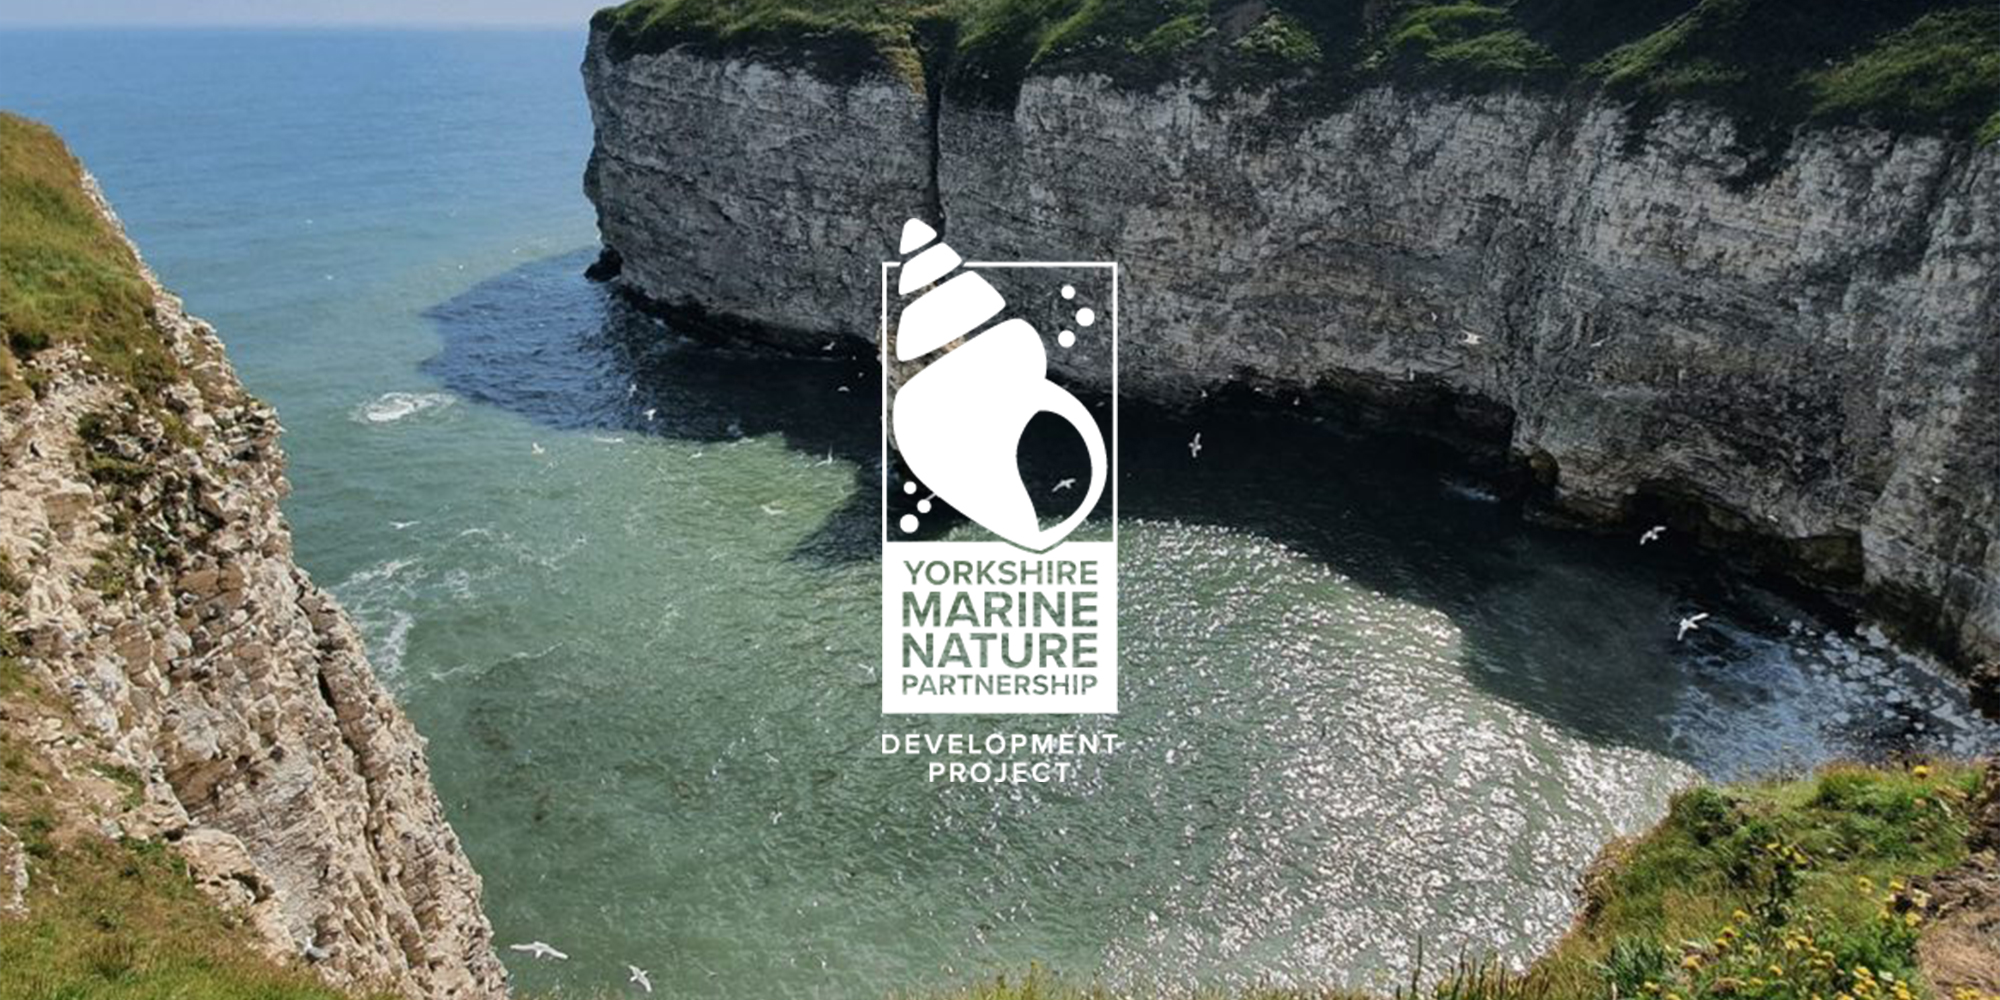 Yorkshire marine nature logo shown over a landscape of cliffs and the sea